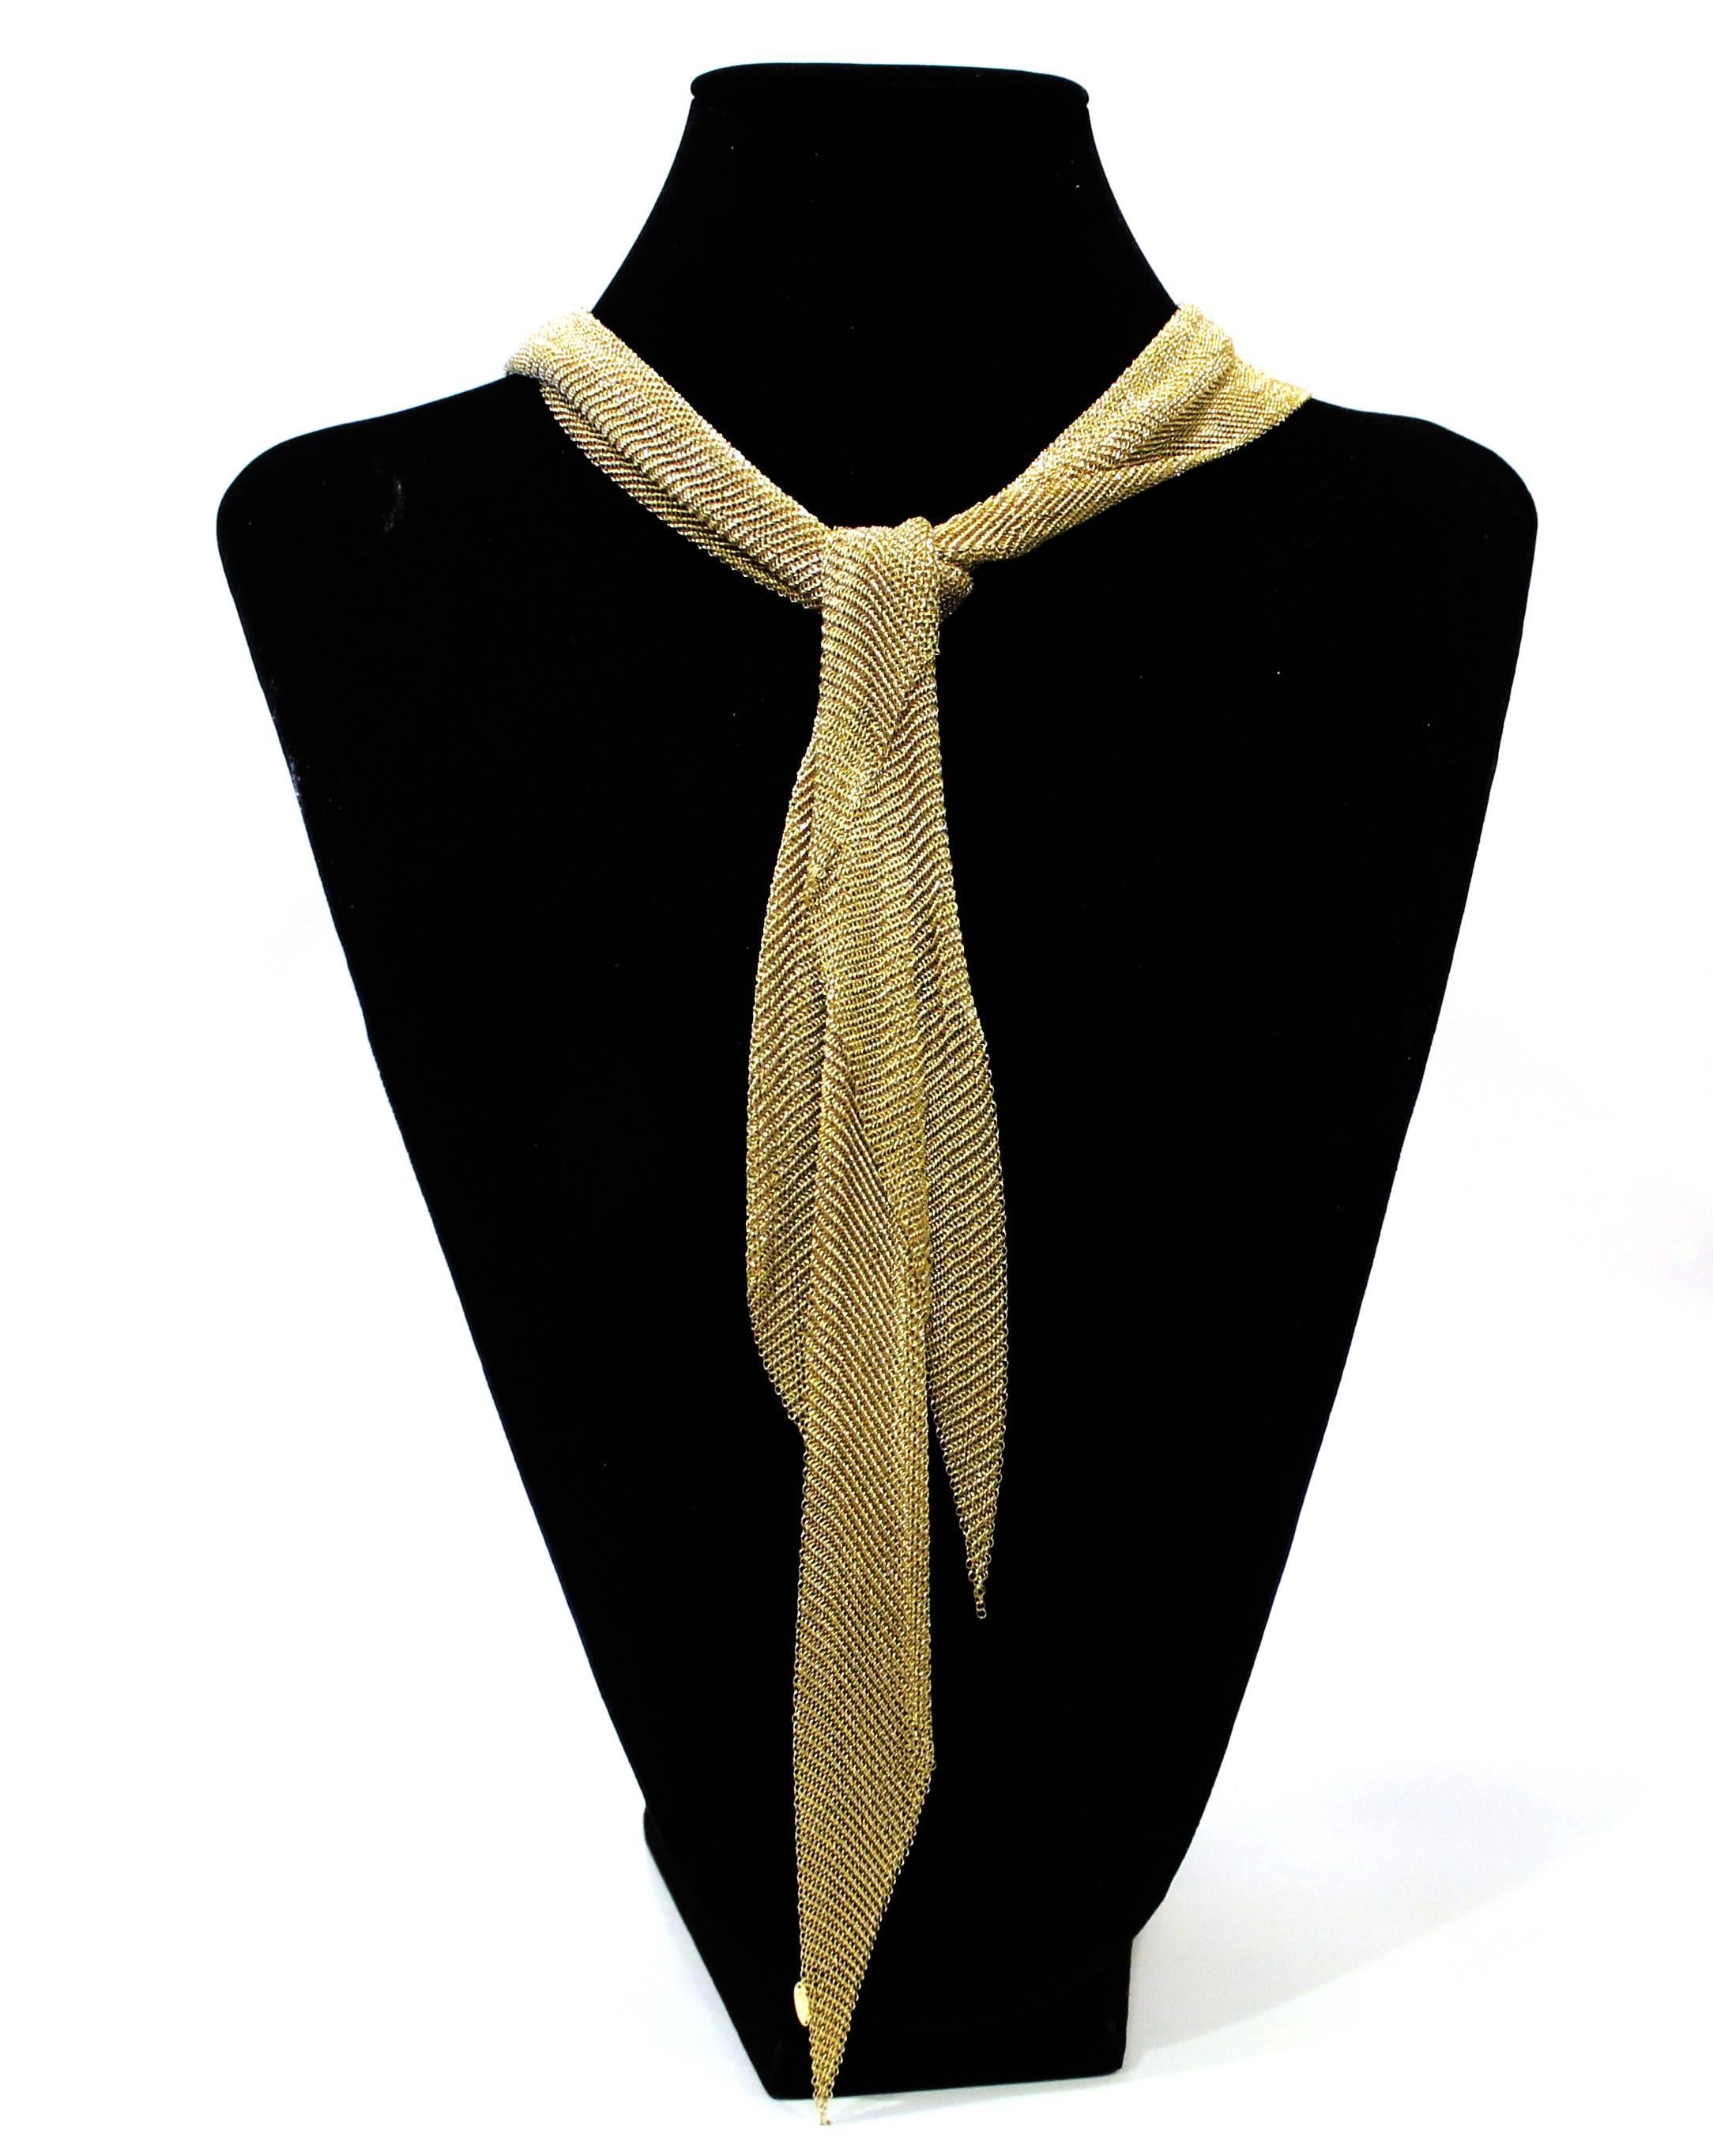 This 18 karat large mesh scarf necklace by Elsa Peretti is malleable and ergonomic in the way it drapes over the body’s contours. 3 inches wide, 42 inches long, 178 grams